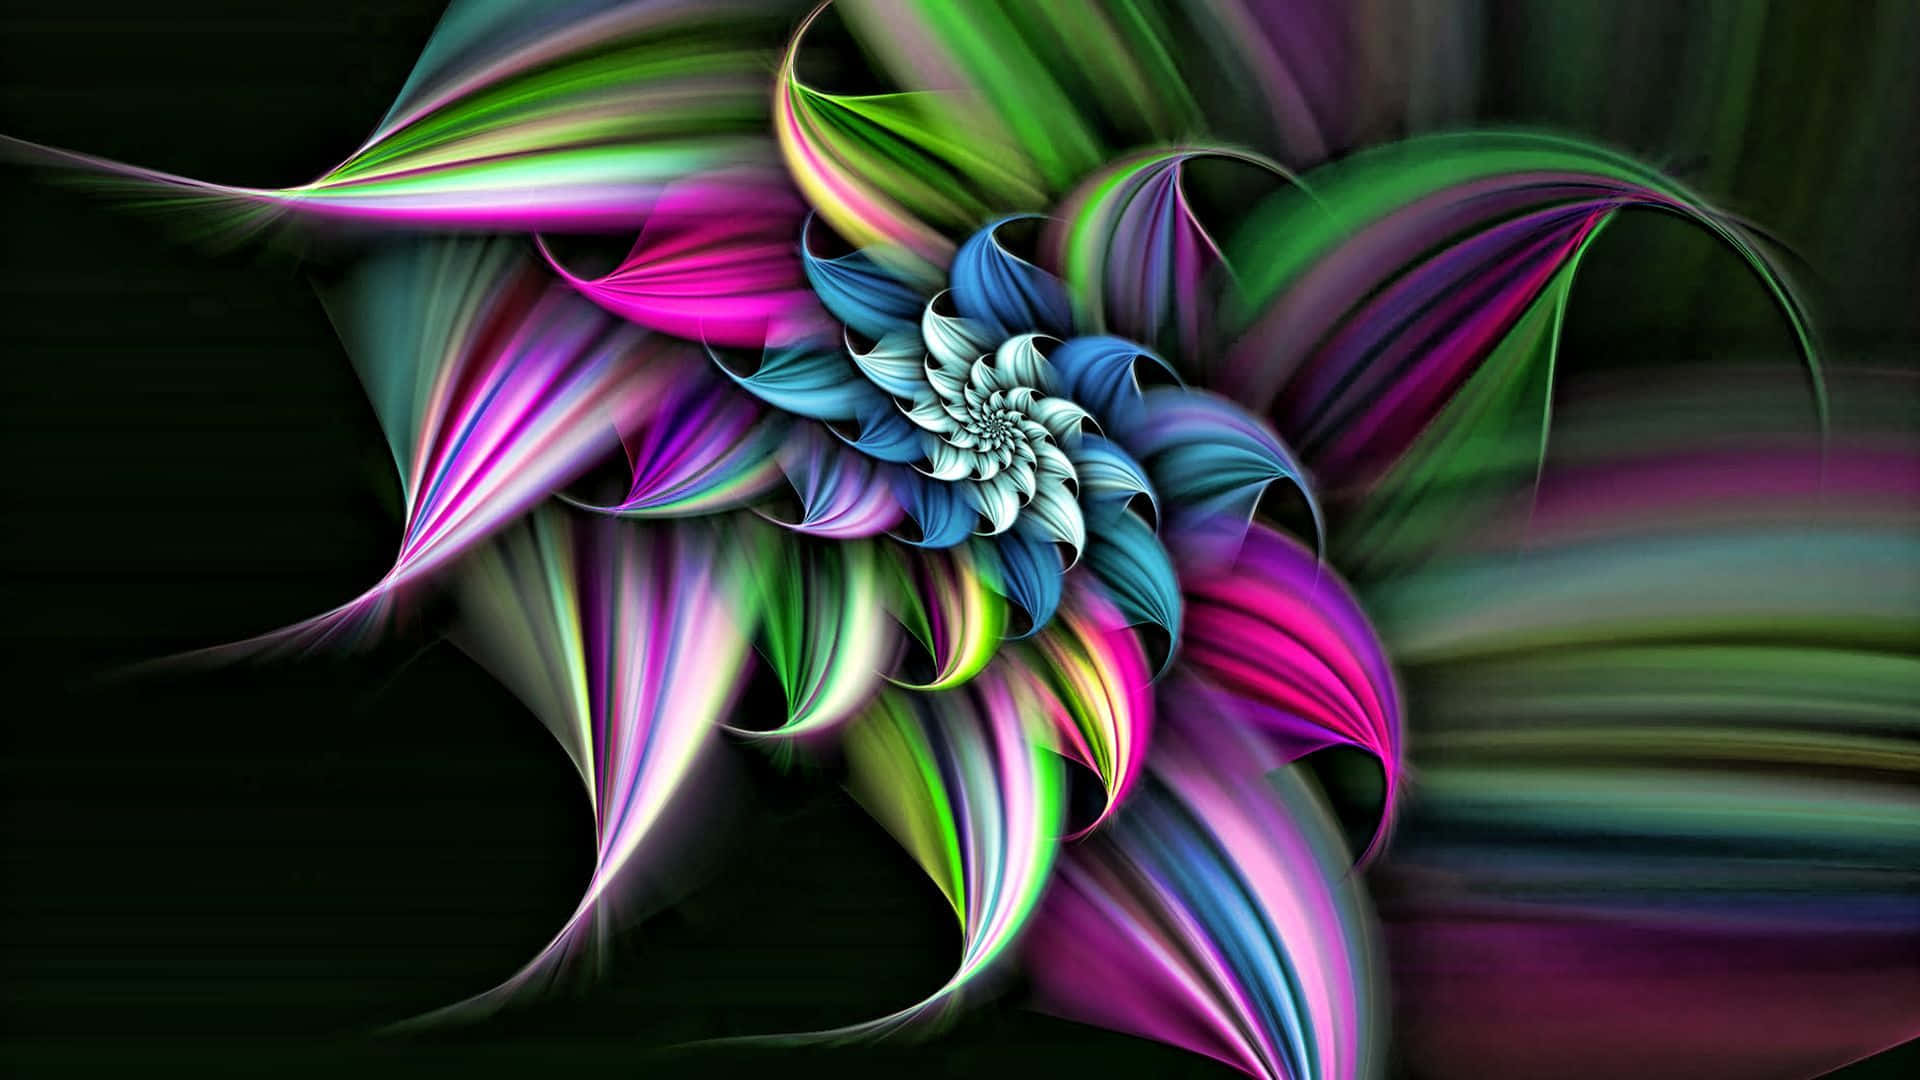 Vibrant Psychedelic Flowers Explosion Wallpaper